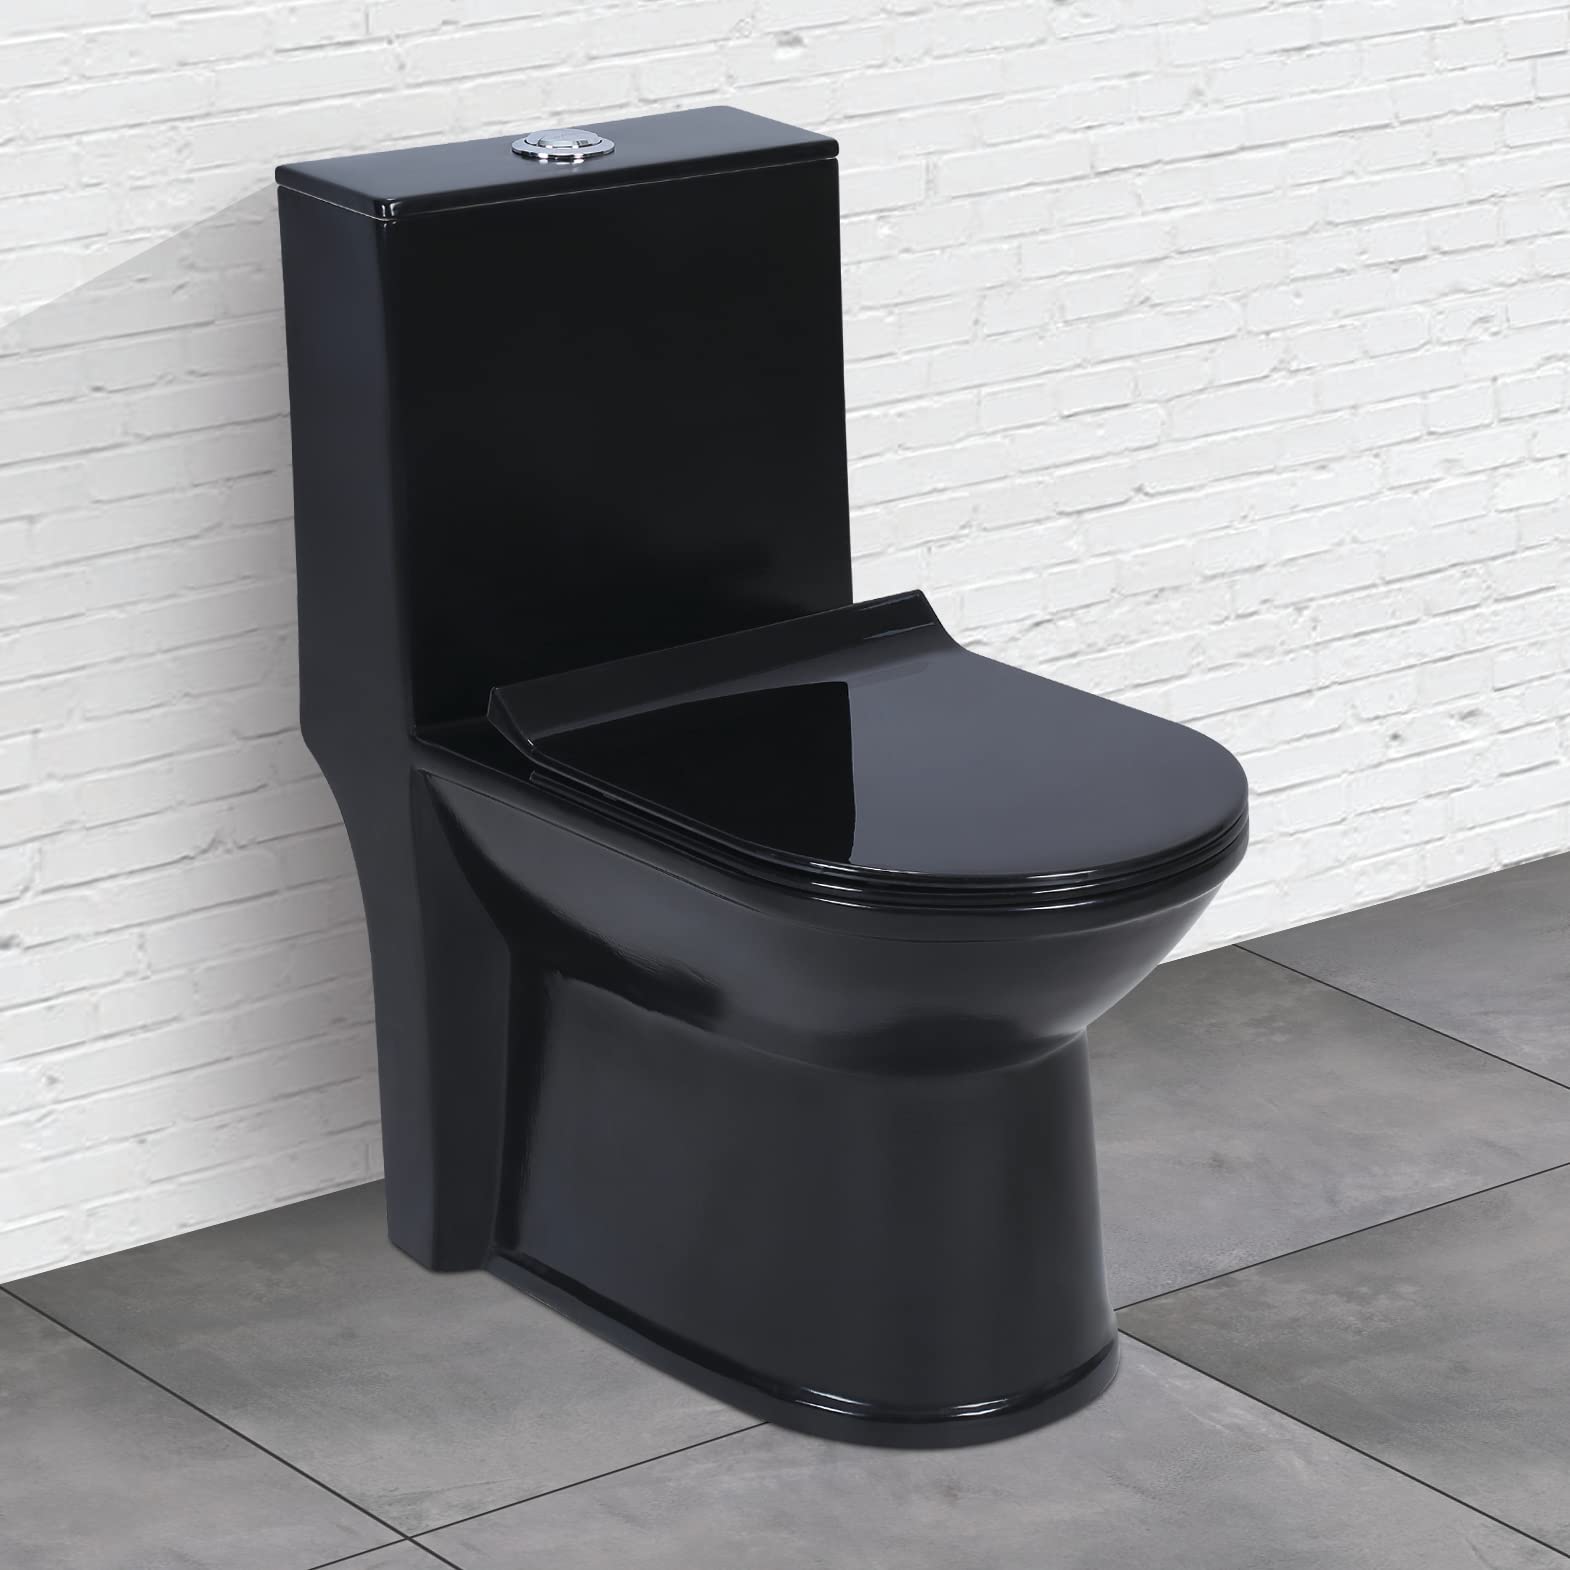 Plantex Platinium Ceramic Rimless One Piece Western Toilet/Water Closet/Commode With Soft Close Toilet Seat - S Trap Outlet (APS-745, Black)